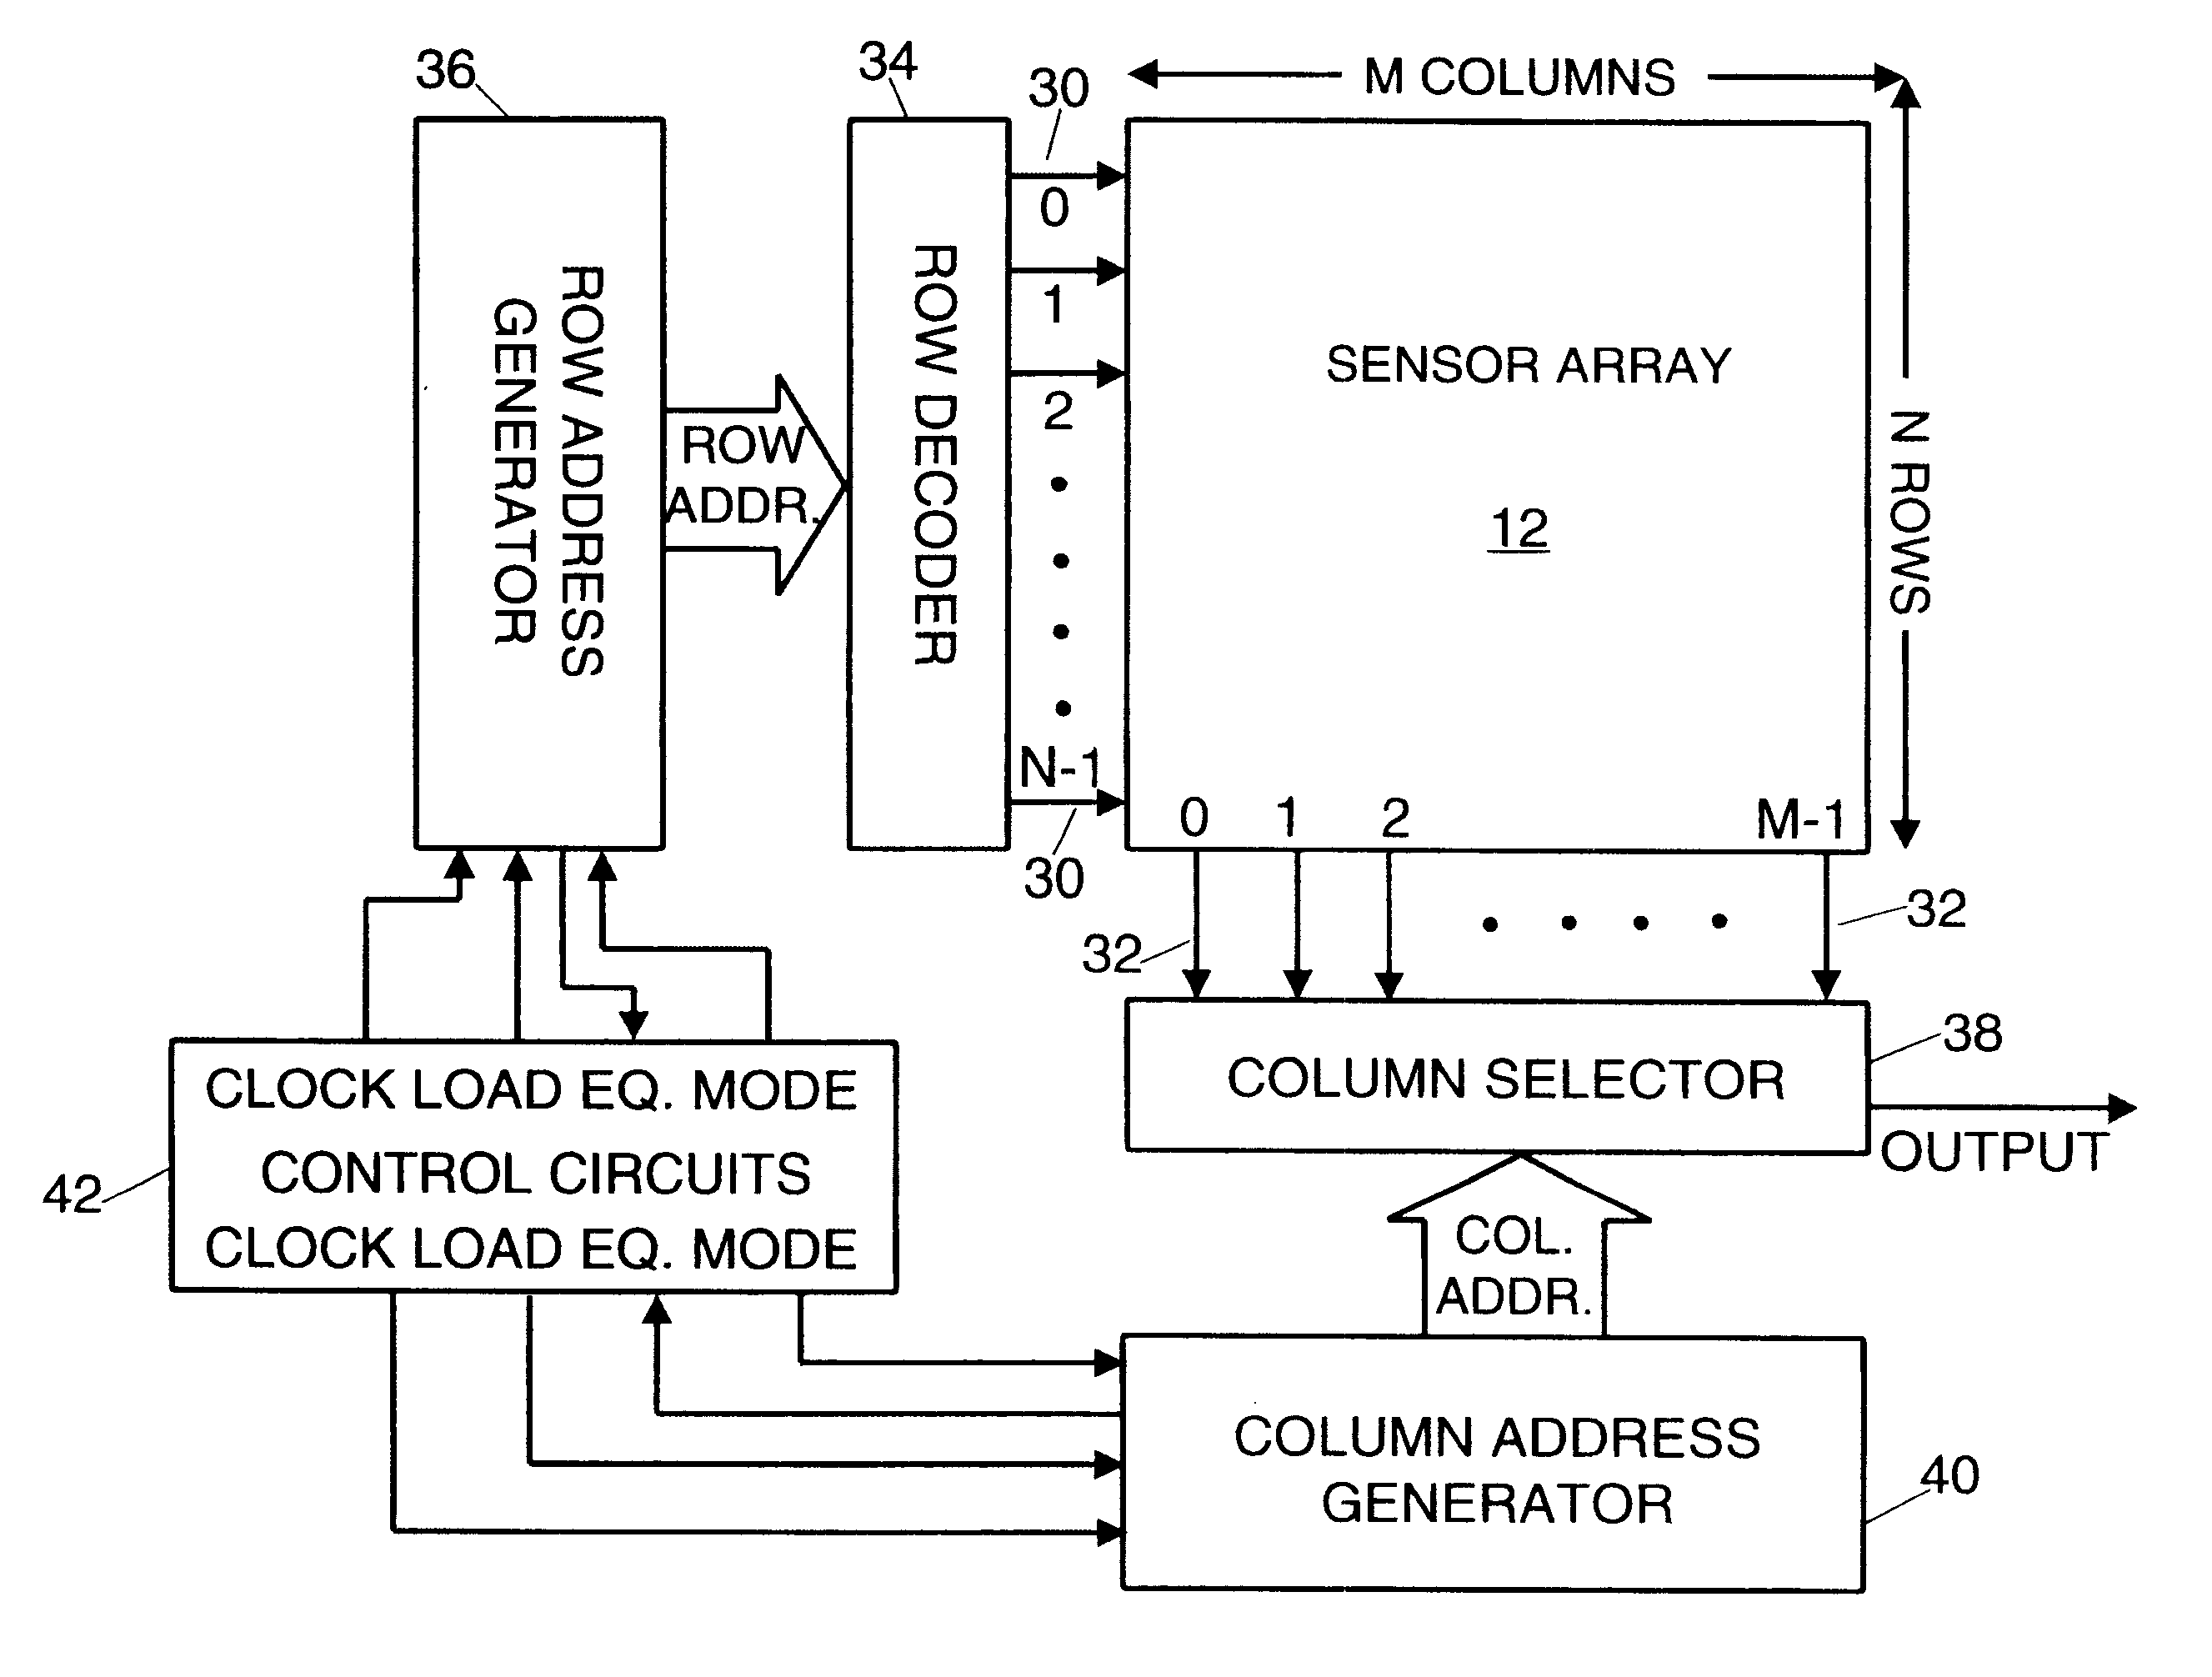 Image scanning circuitry with row and column addressing for use in electronic cameras